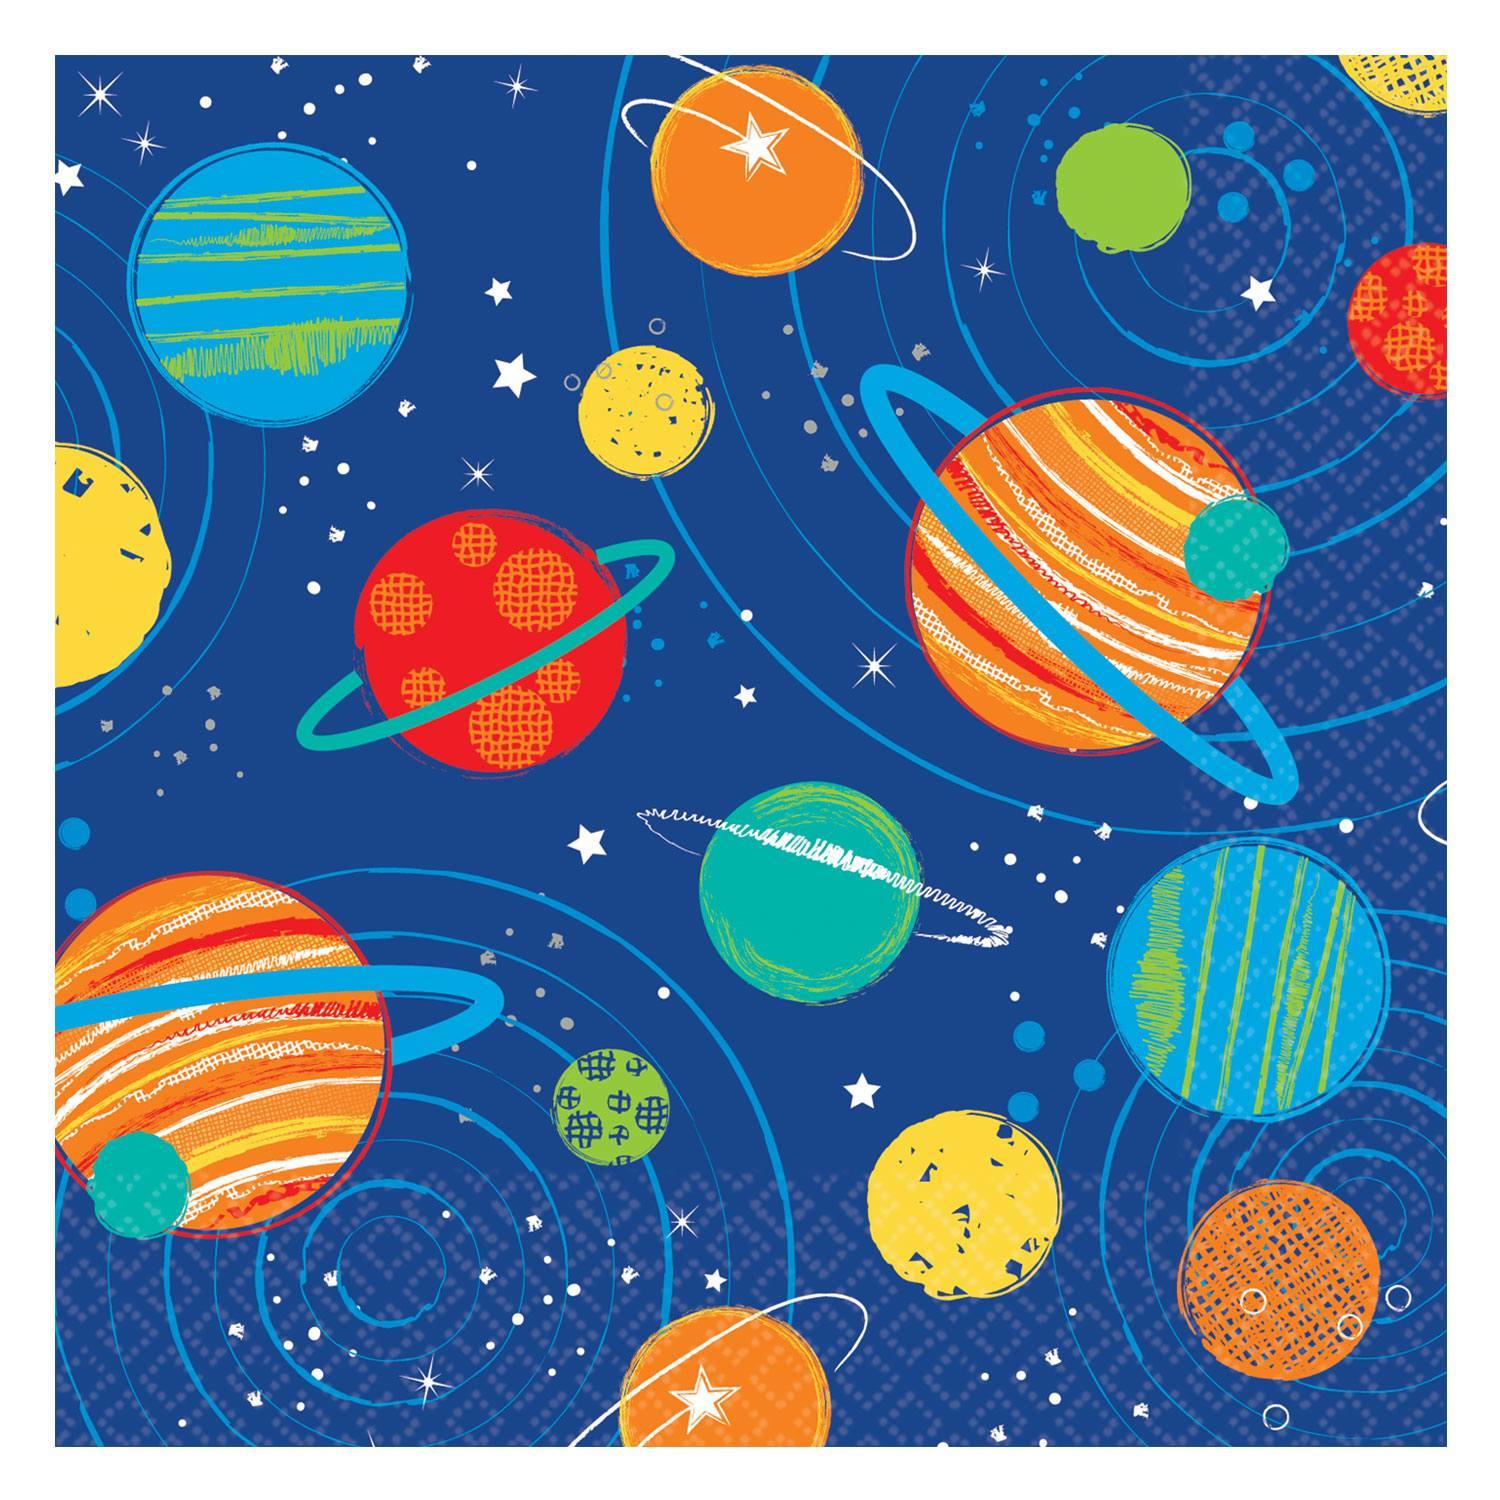 Blast Off Birthday Beverage Napkins pk16 25cm square by Amscan 502278 available from the Blast Off Birthday partyware collection here at Karnival Costumes online party shop